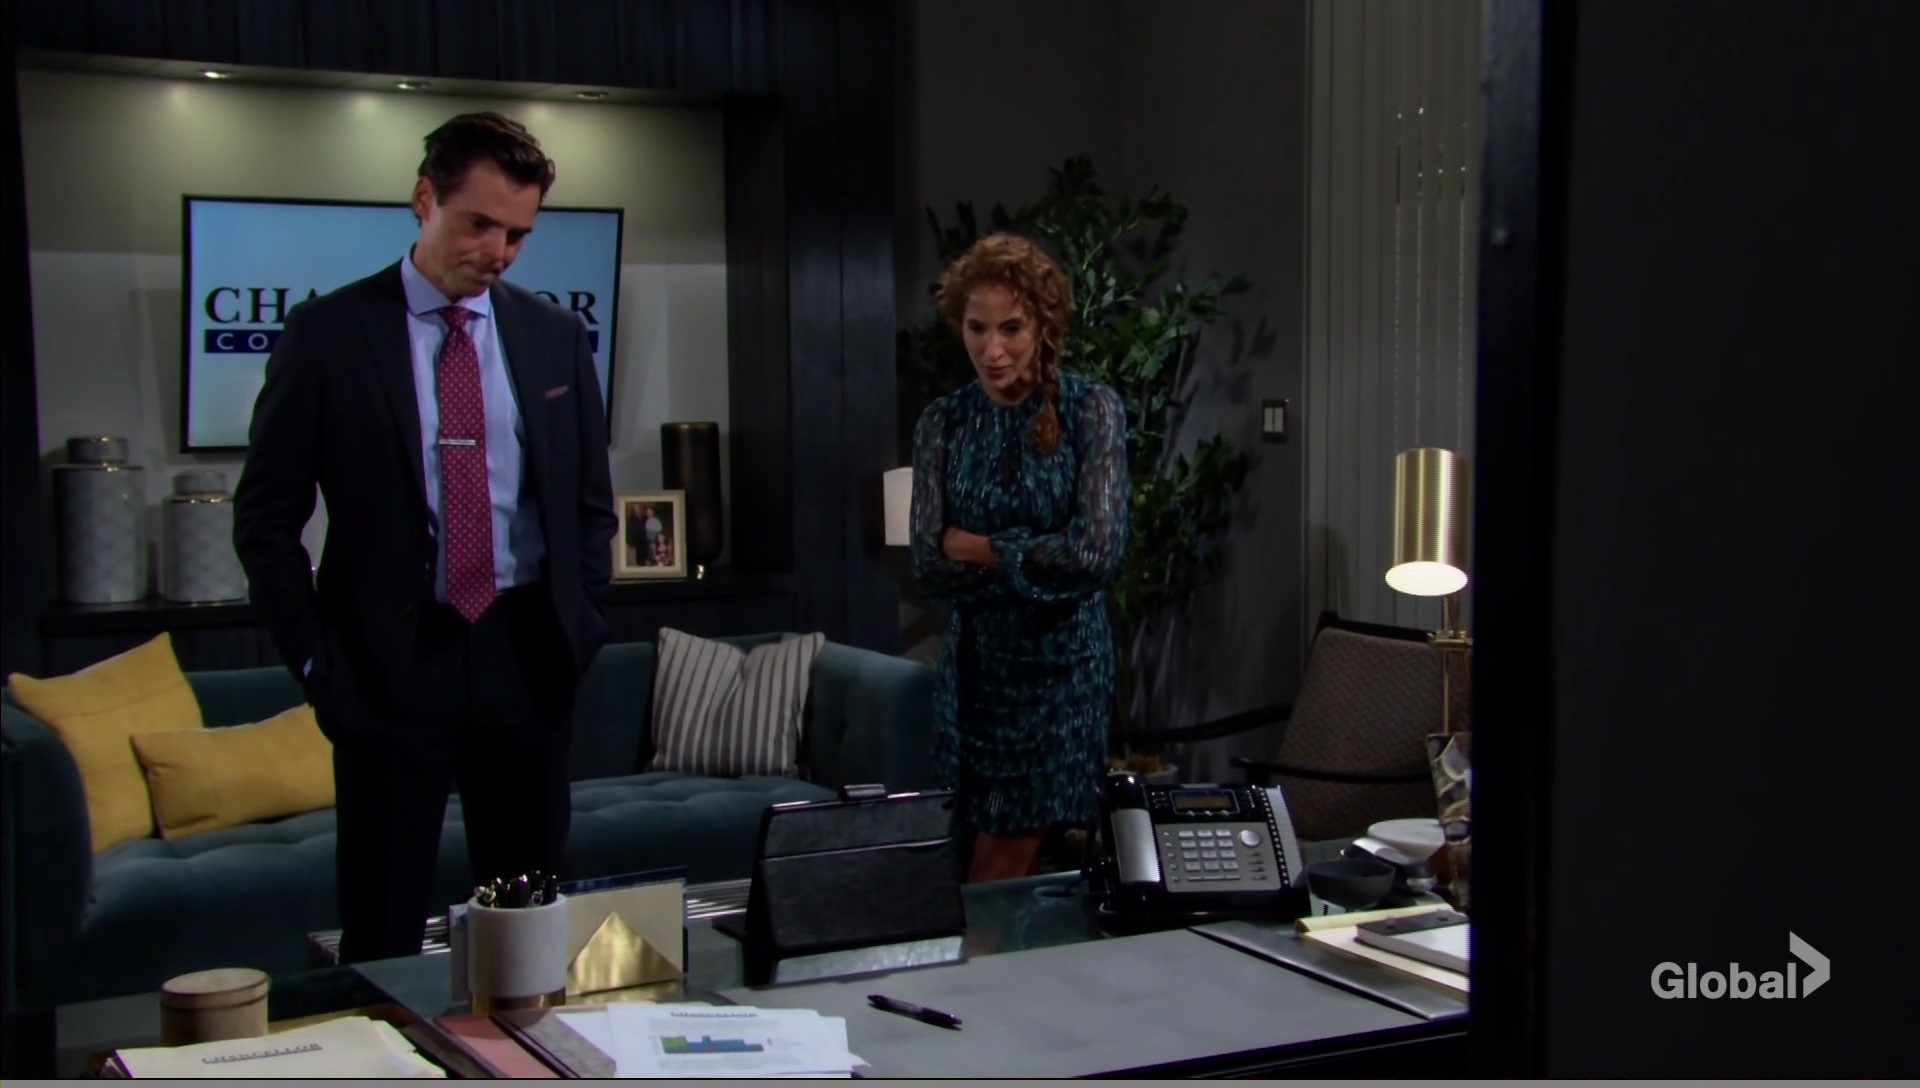 billy lily disagree work ethics young restless